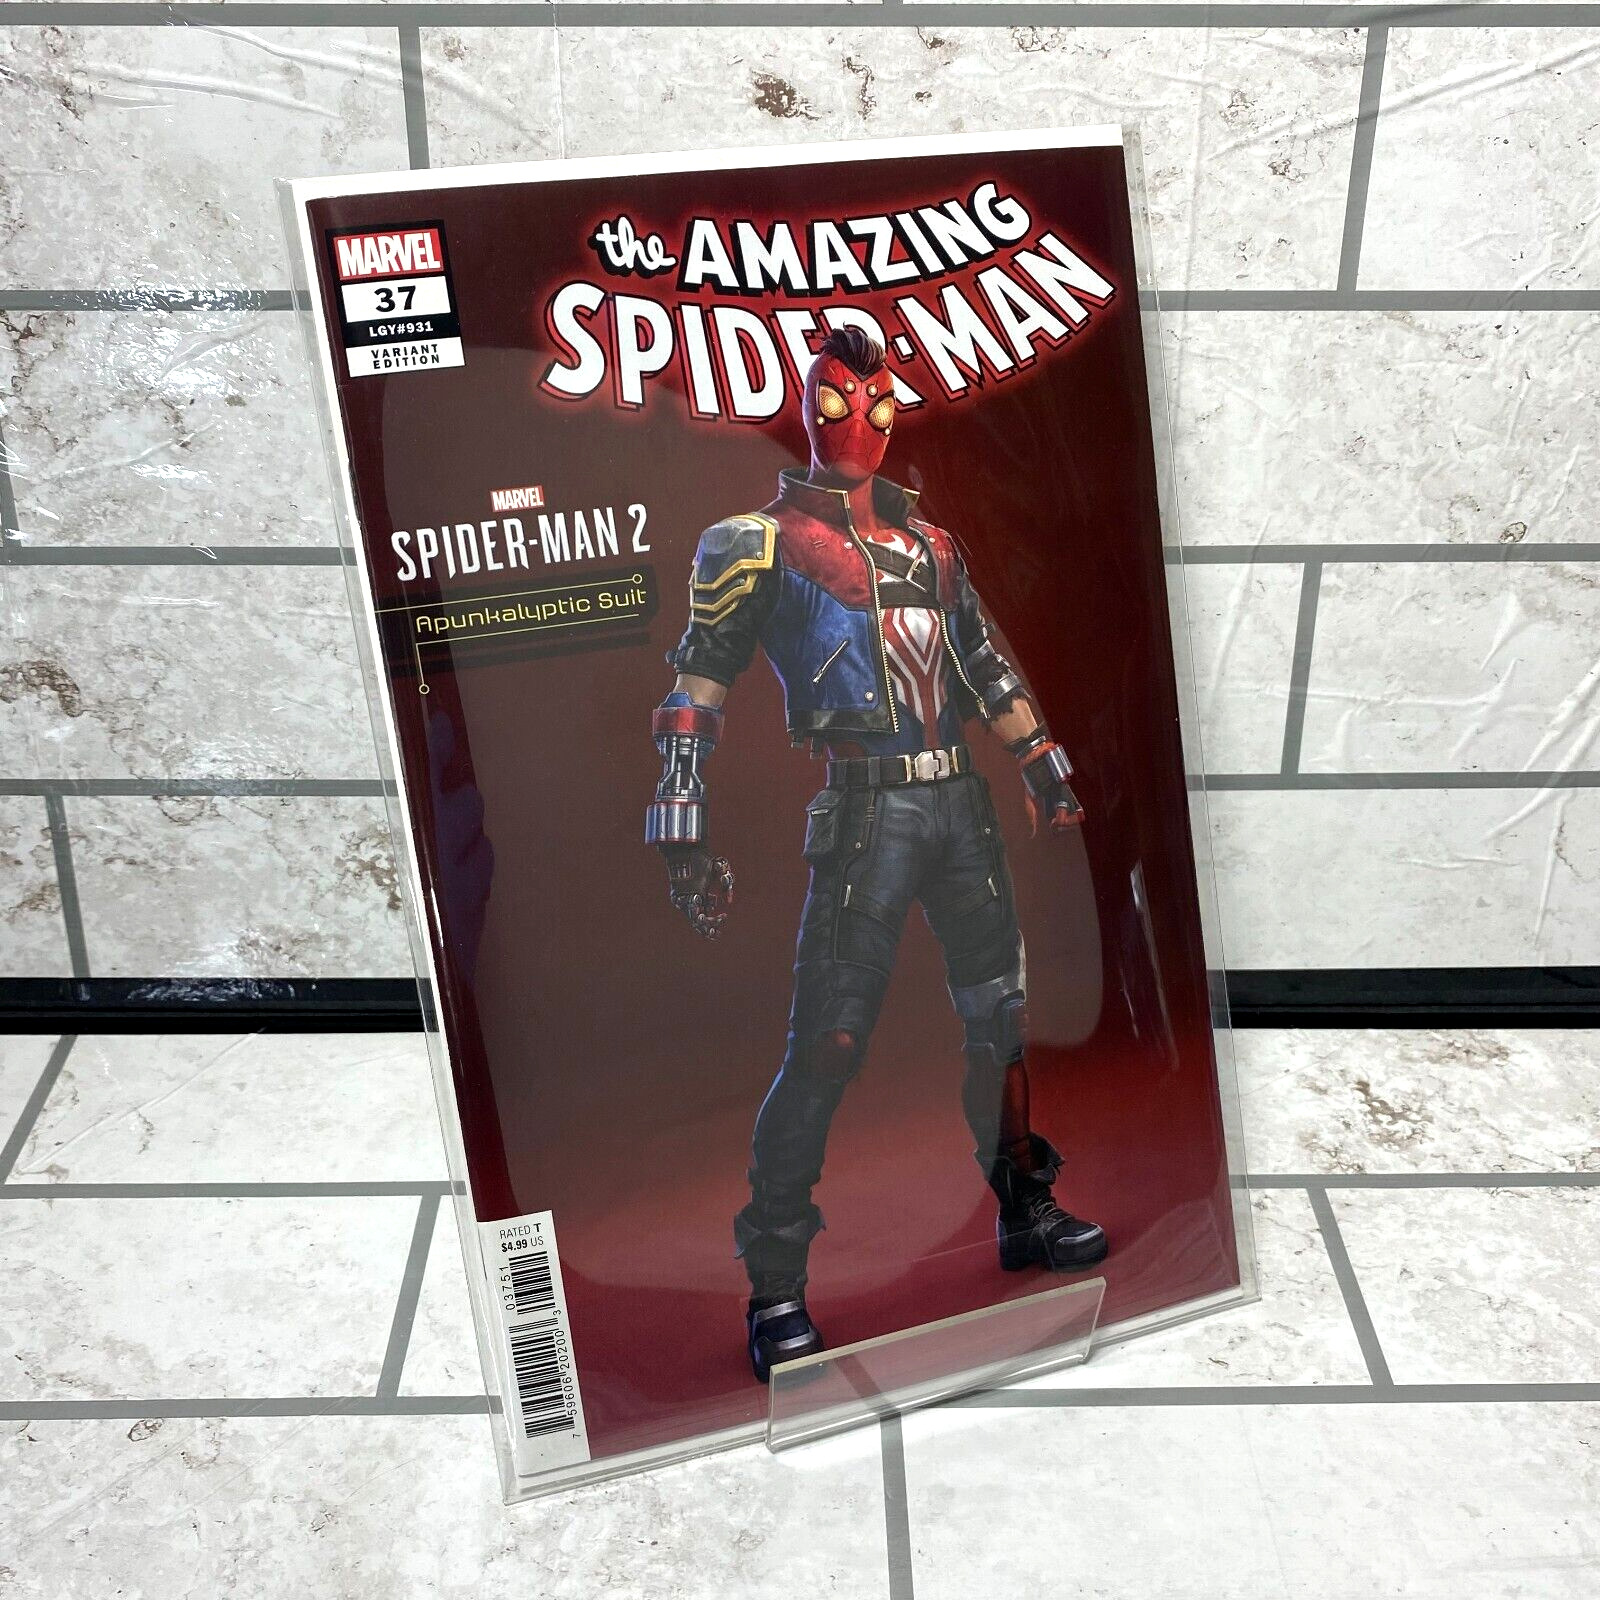 The Amazing Spider-Man 37 Apunkalyptic Suit Video Game Variant